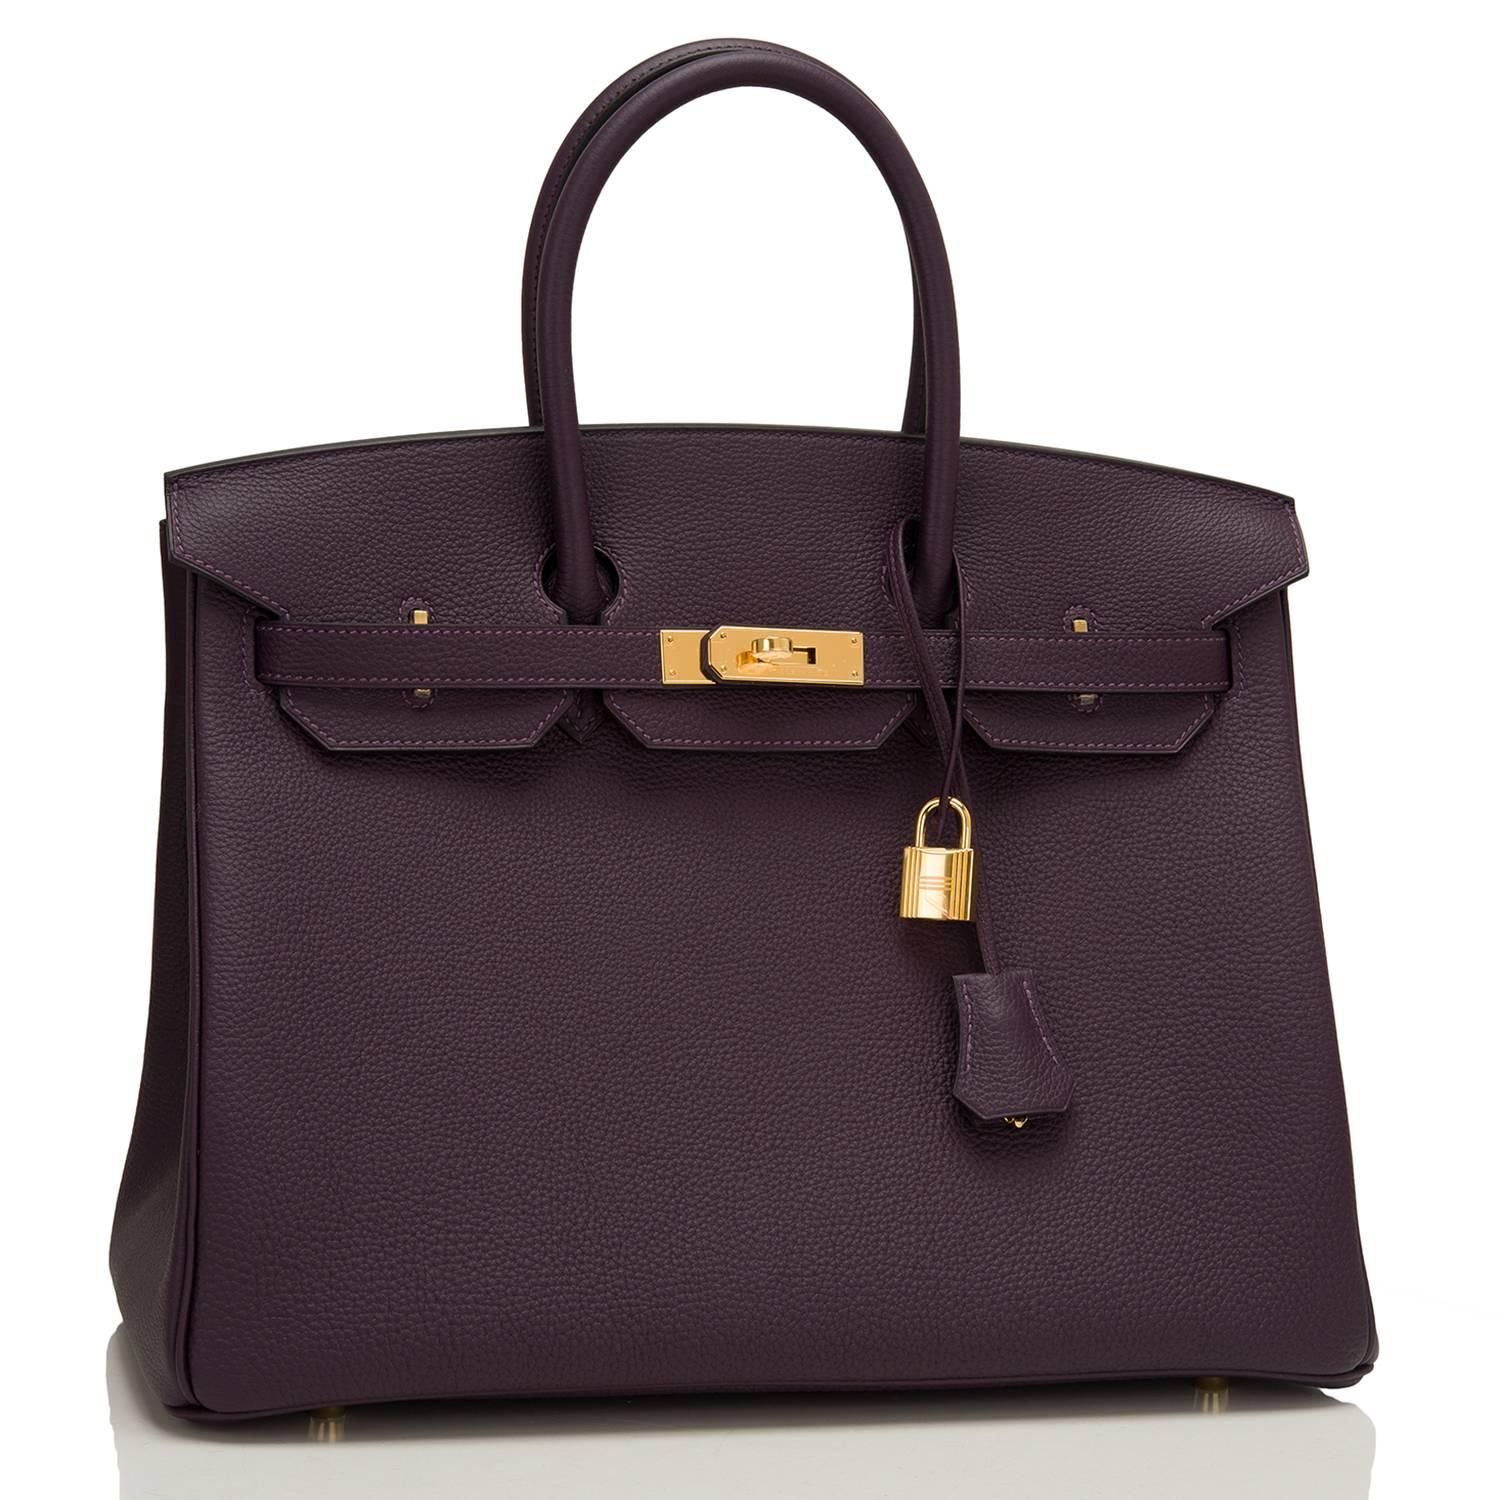 Hermes Raisin Birkin 35cm of togo with gold hardware.

This Birkin has a front toggle closure, a clochette with lock and two keys, and double rolled handles.

The interior is lined with Raisin chevre and has one zip pocket with an Hermes